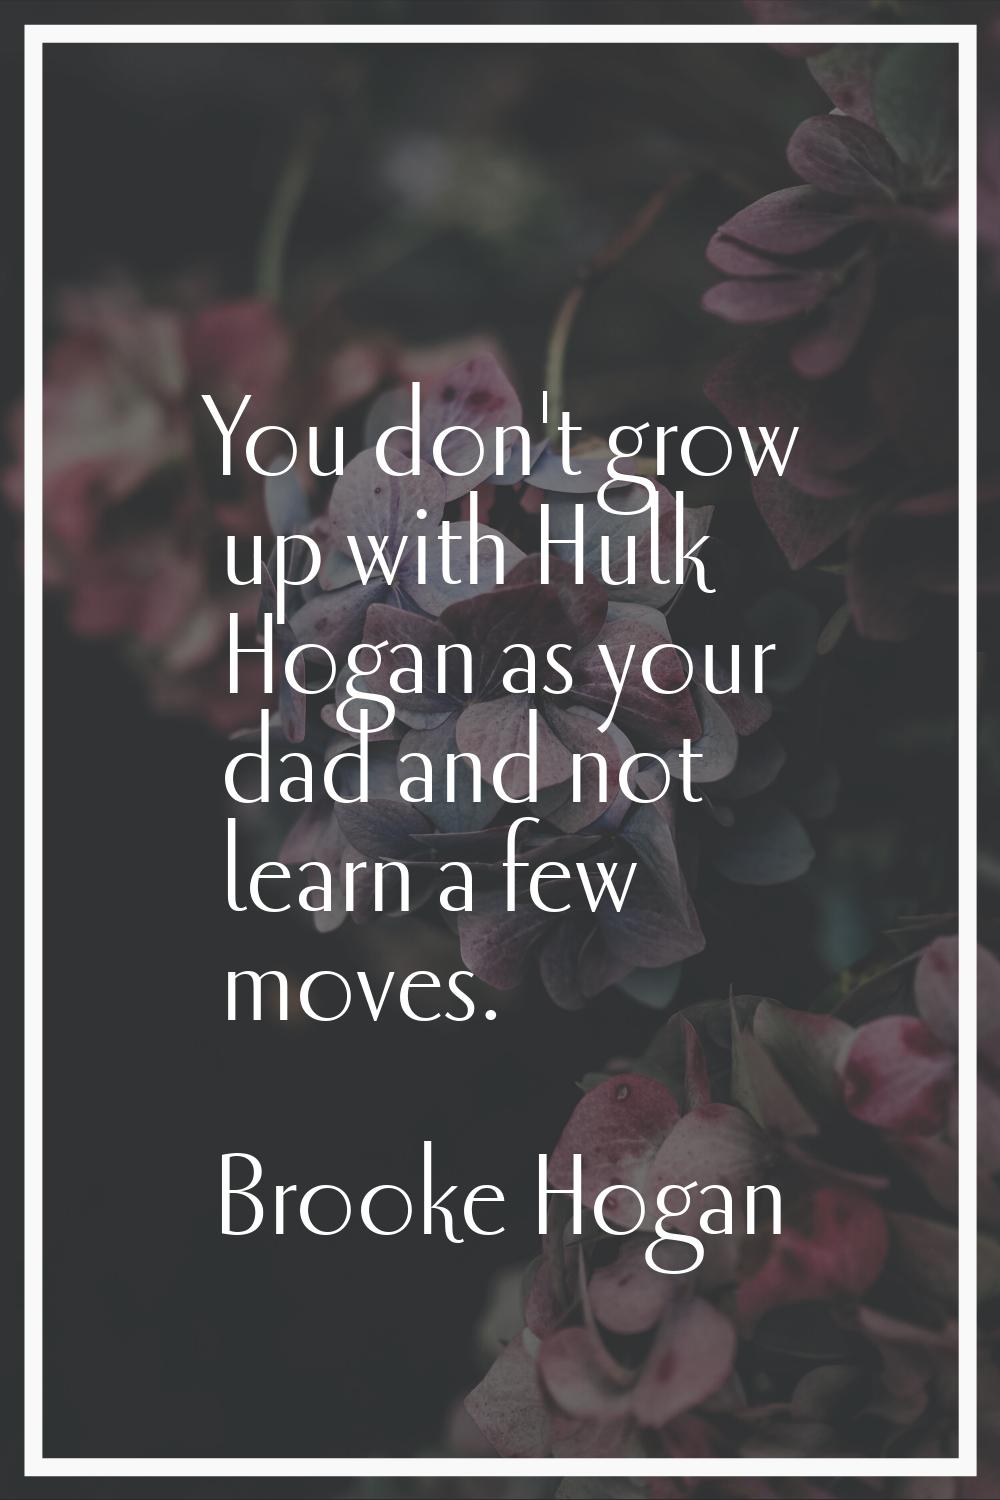 You don't grow up with Hulk Hogan as your dad and not learn a few moves.